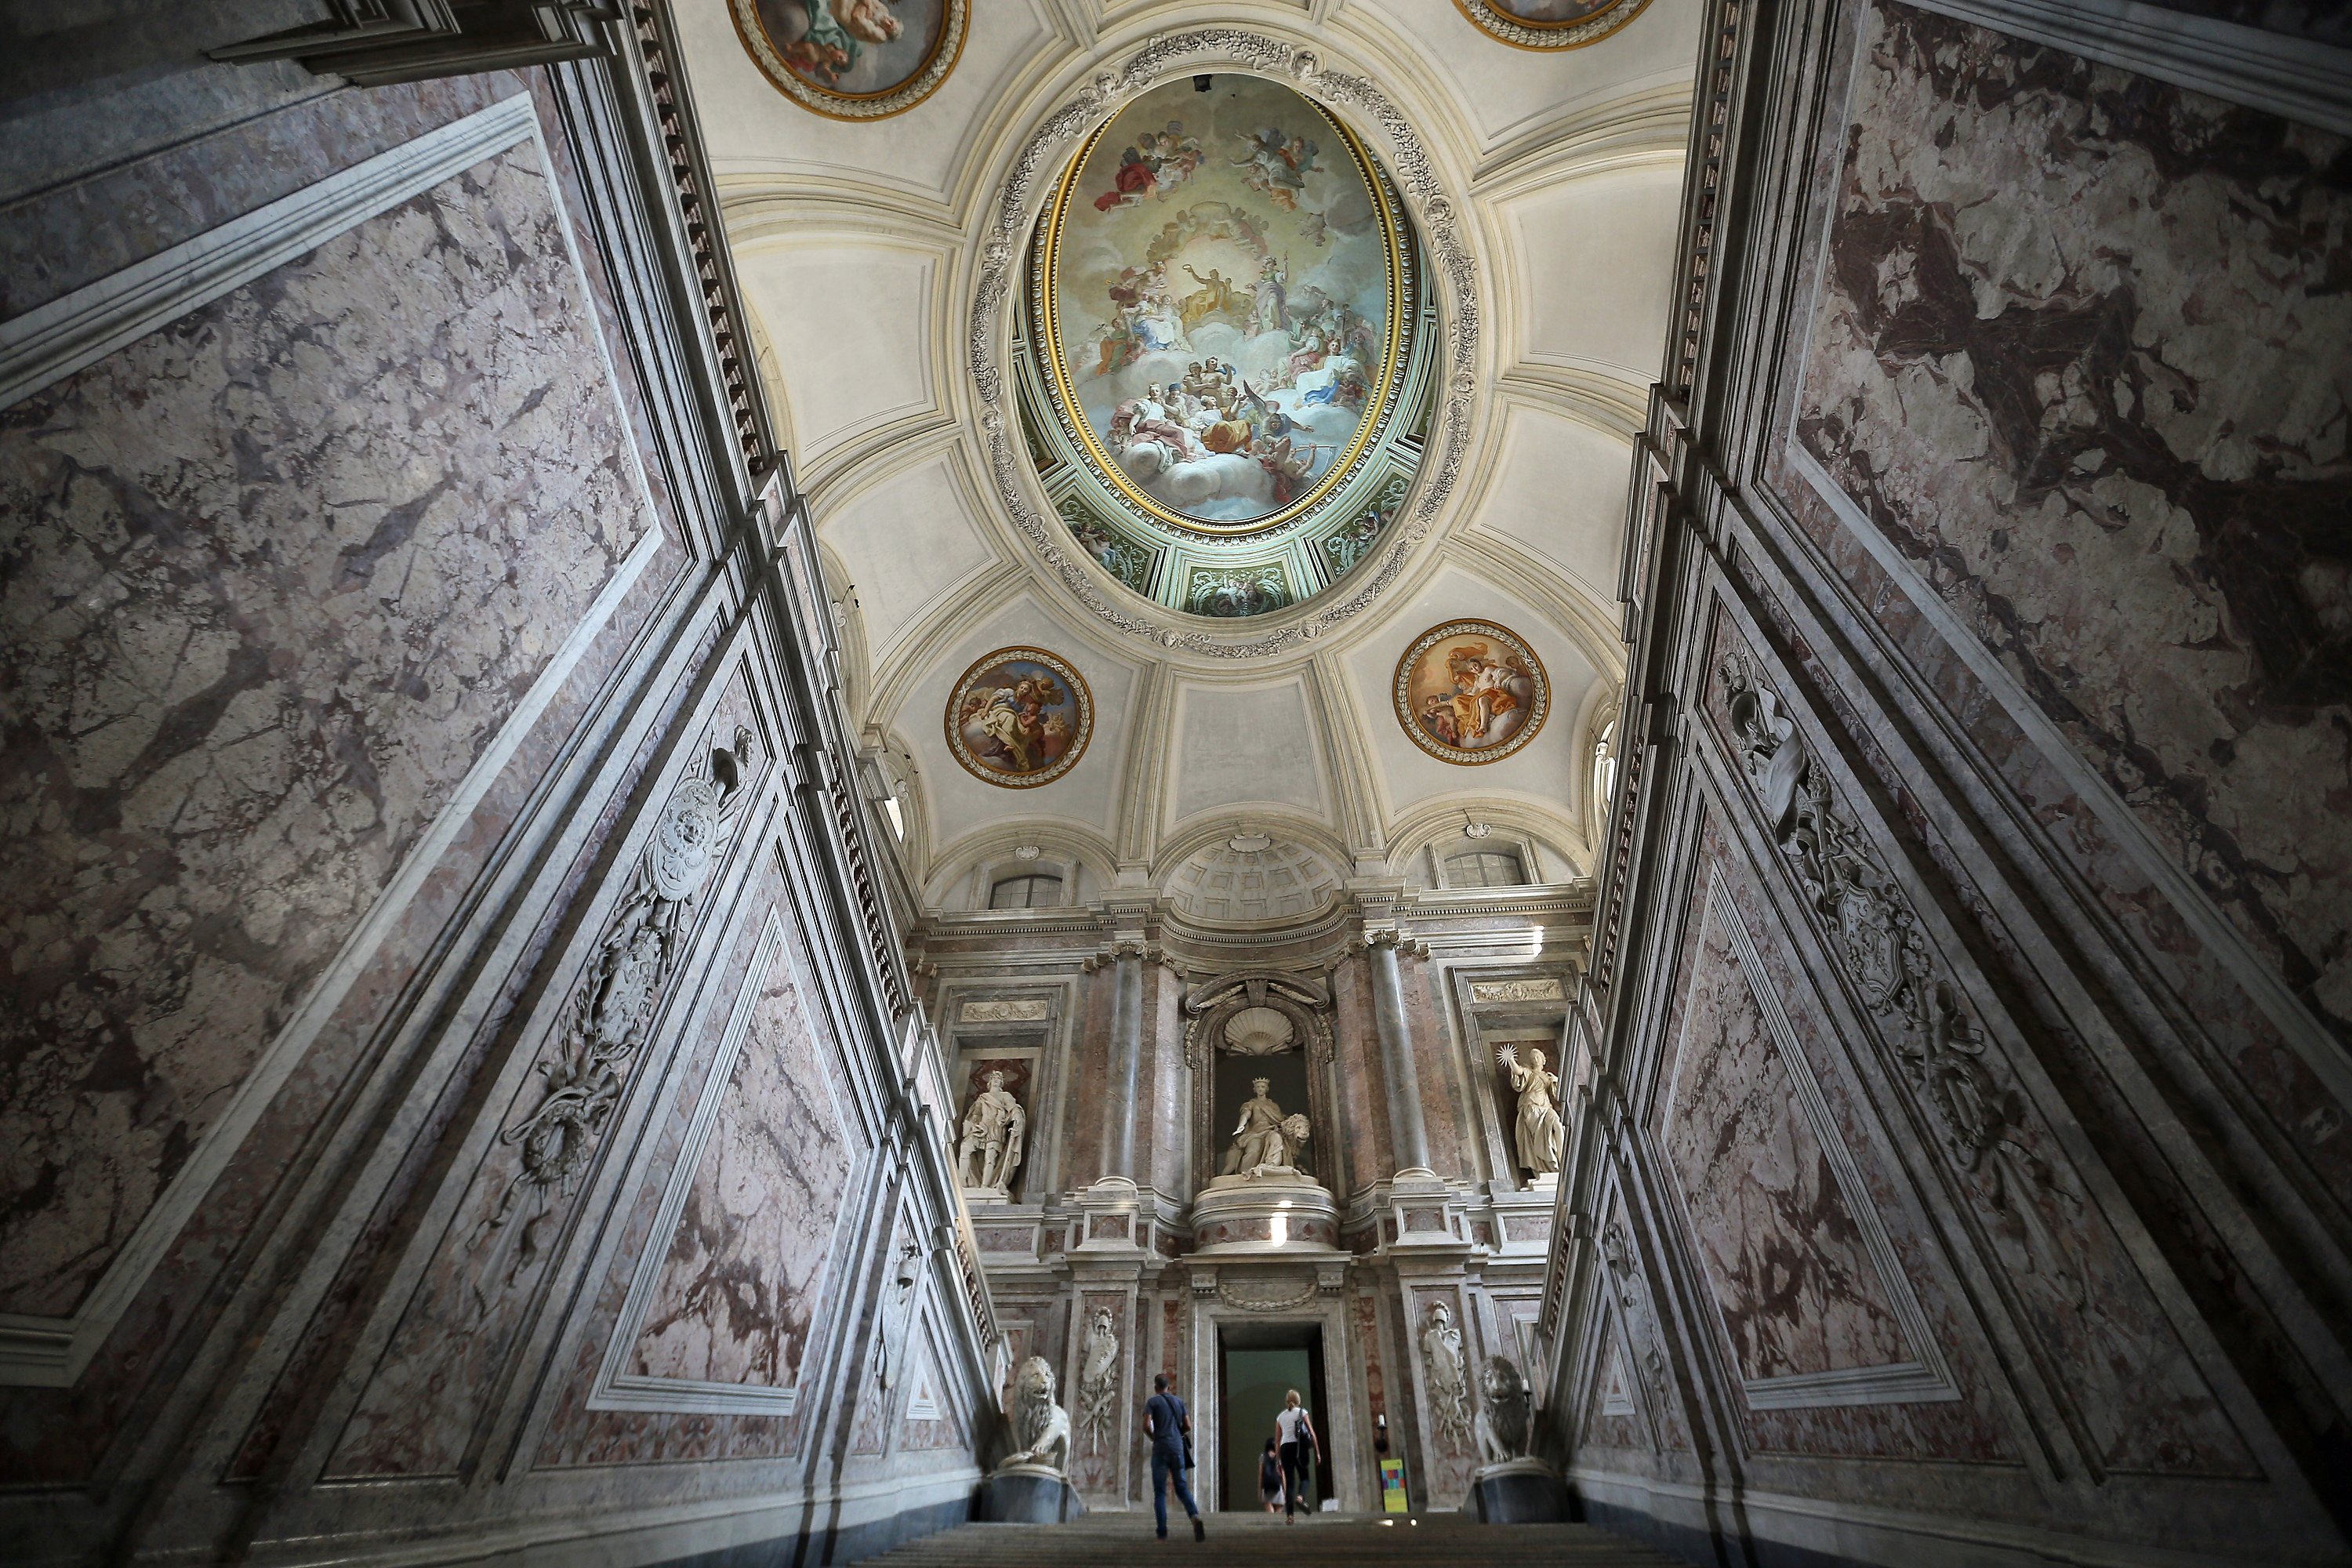 The entrance, with the staircase, of the Royal Palace of